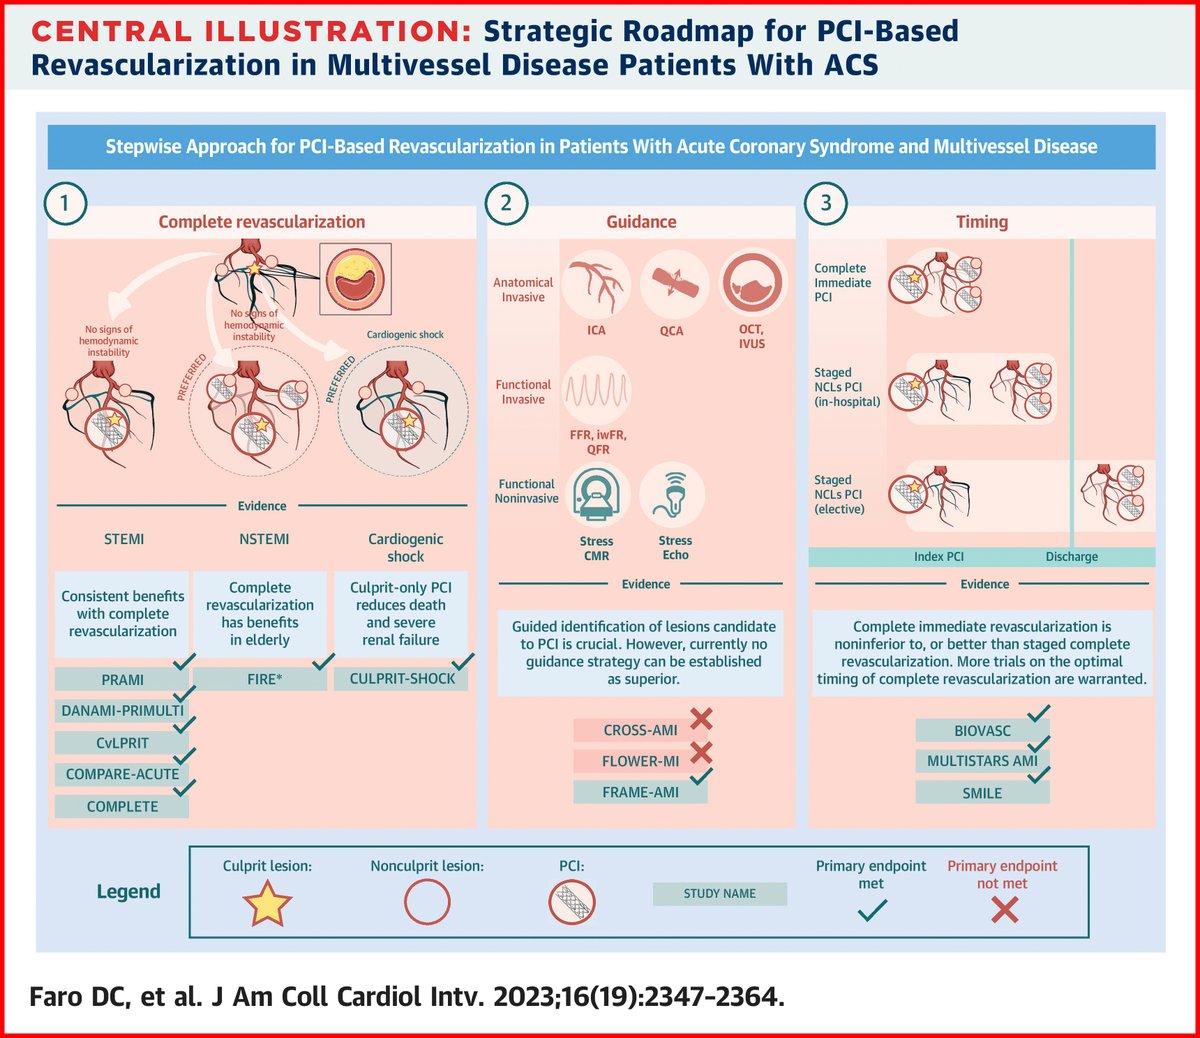 Recently published in #JACCINT: Exploring the complexities of multivessel disease in ACS 🫀. This systematic review delves into uncertainties surrounding complete #revascularization timing & guiding strategies: bit.ly/3LW3Wj2

#cvACS #ACCFIT #CardioTwitter